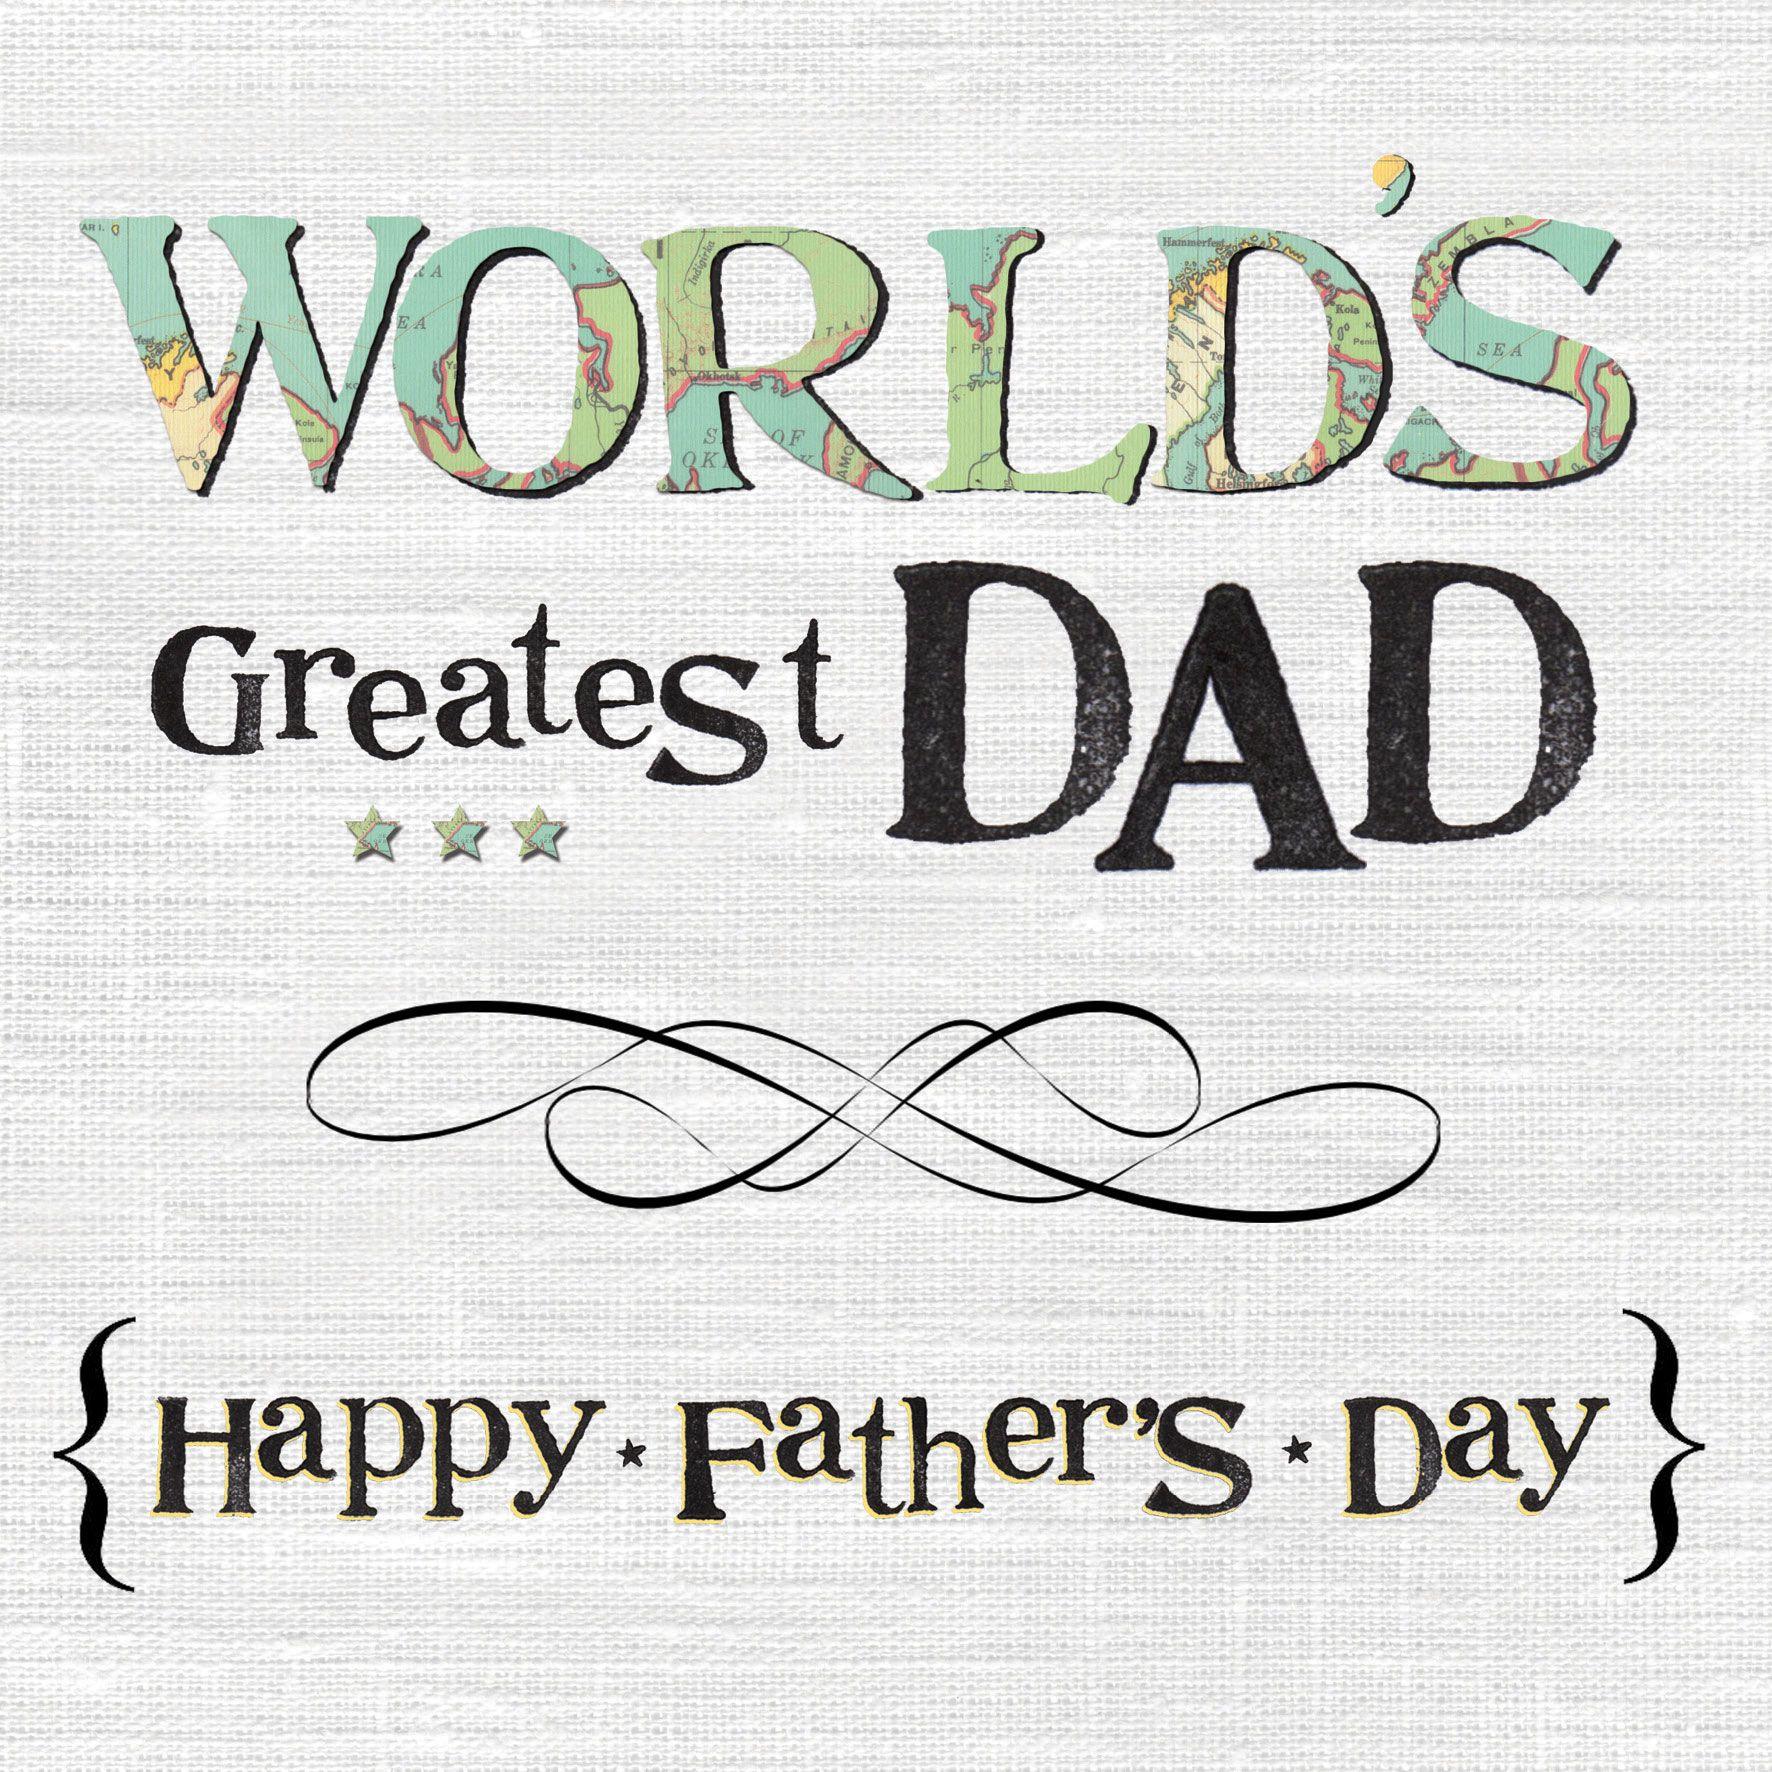 Happy Fathers Day 2016 Quotes, SMS, Messages, Wishes, Poems, Gift